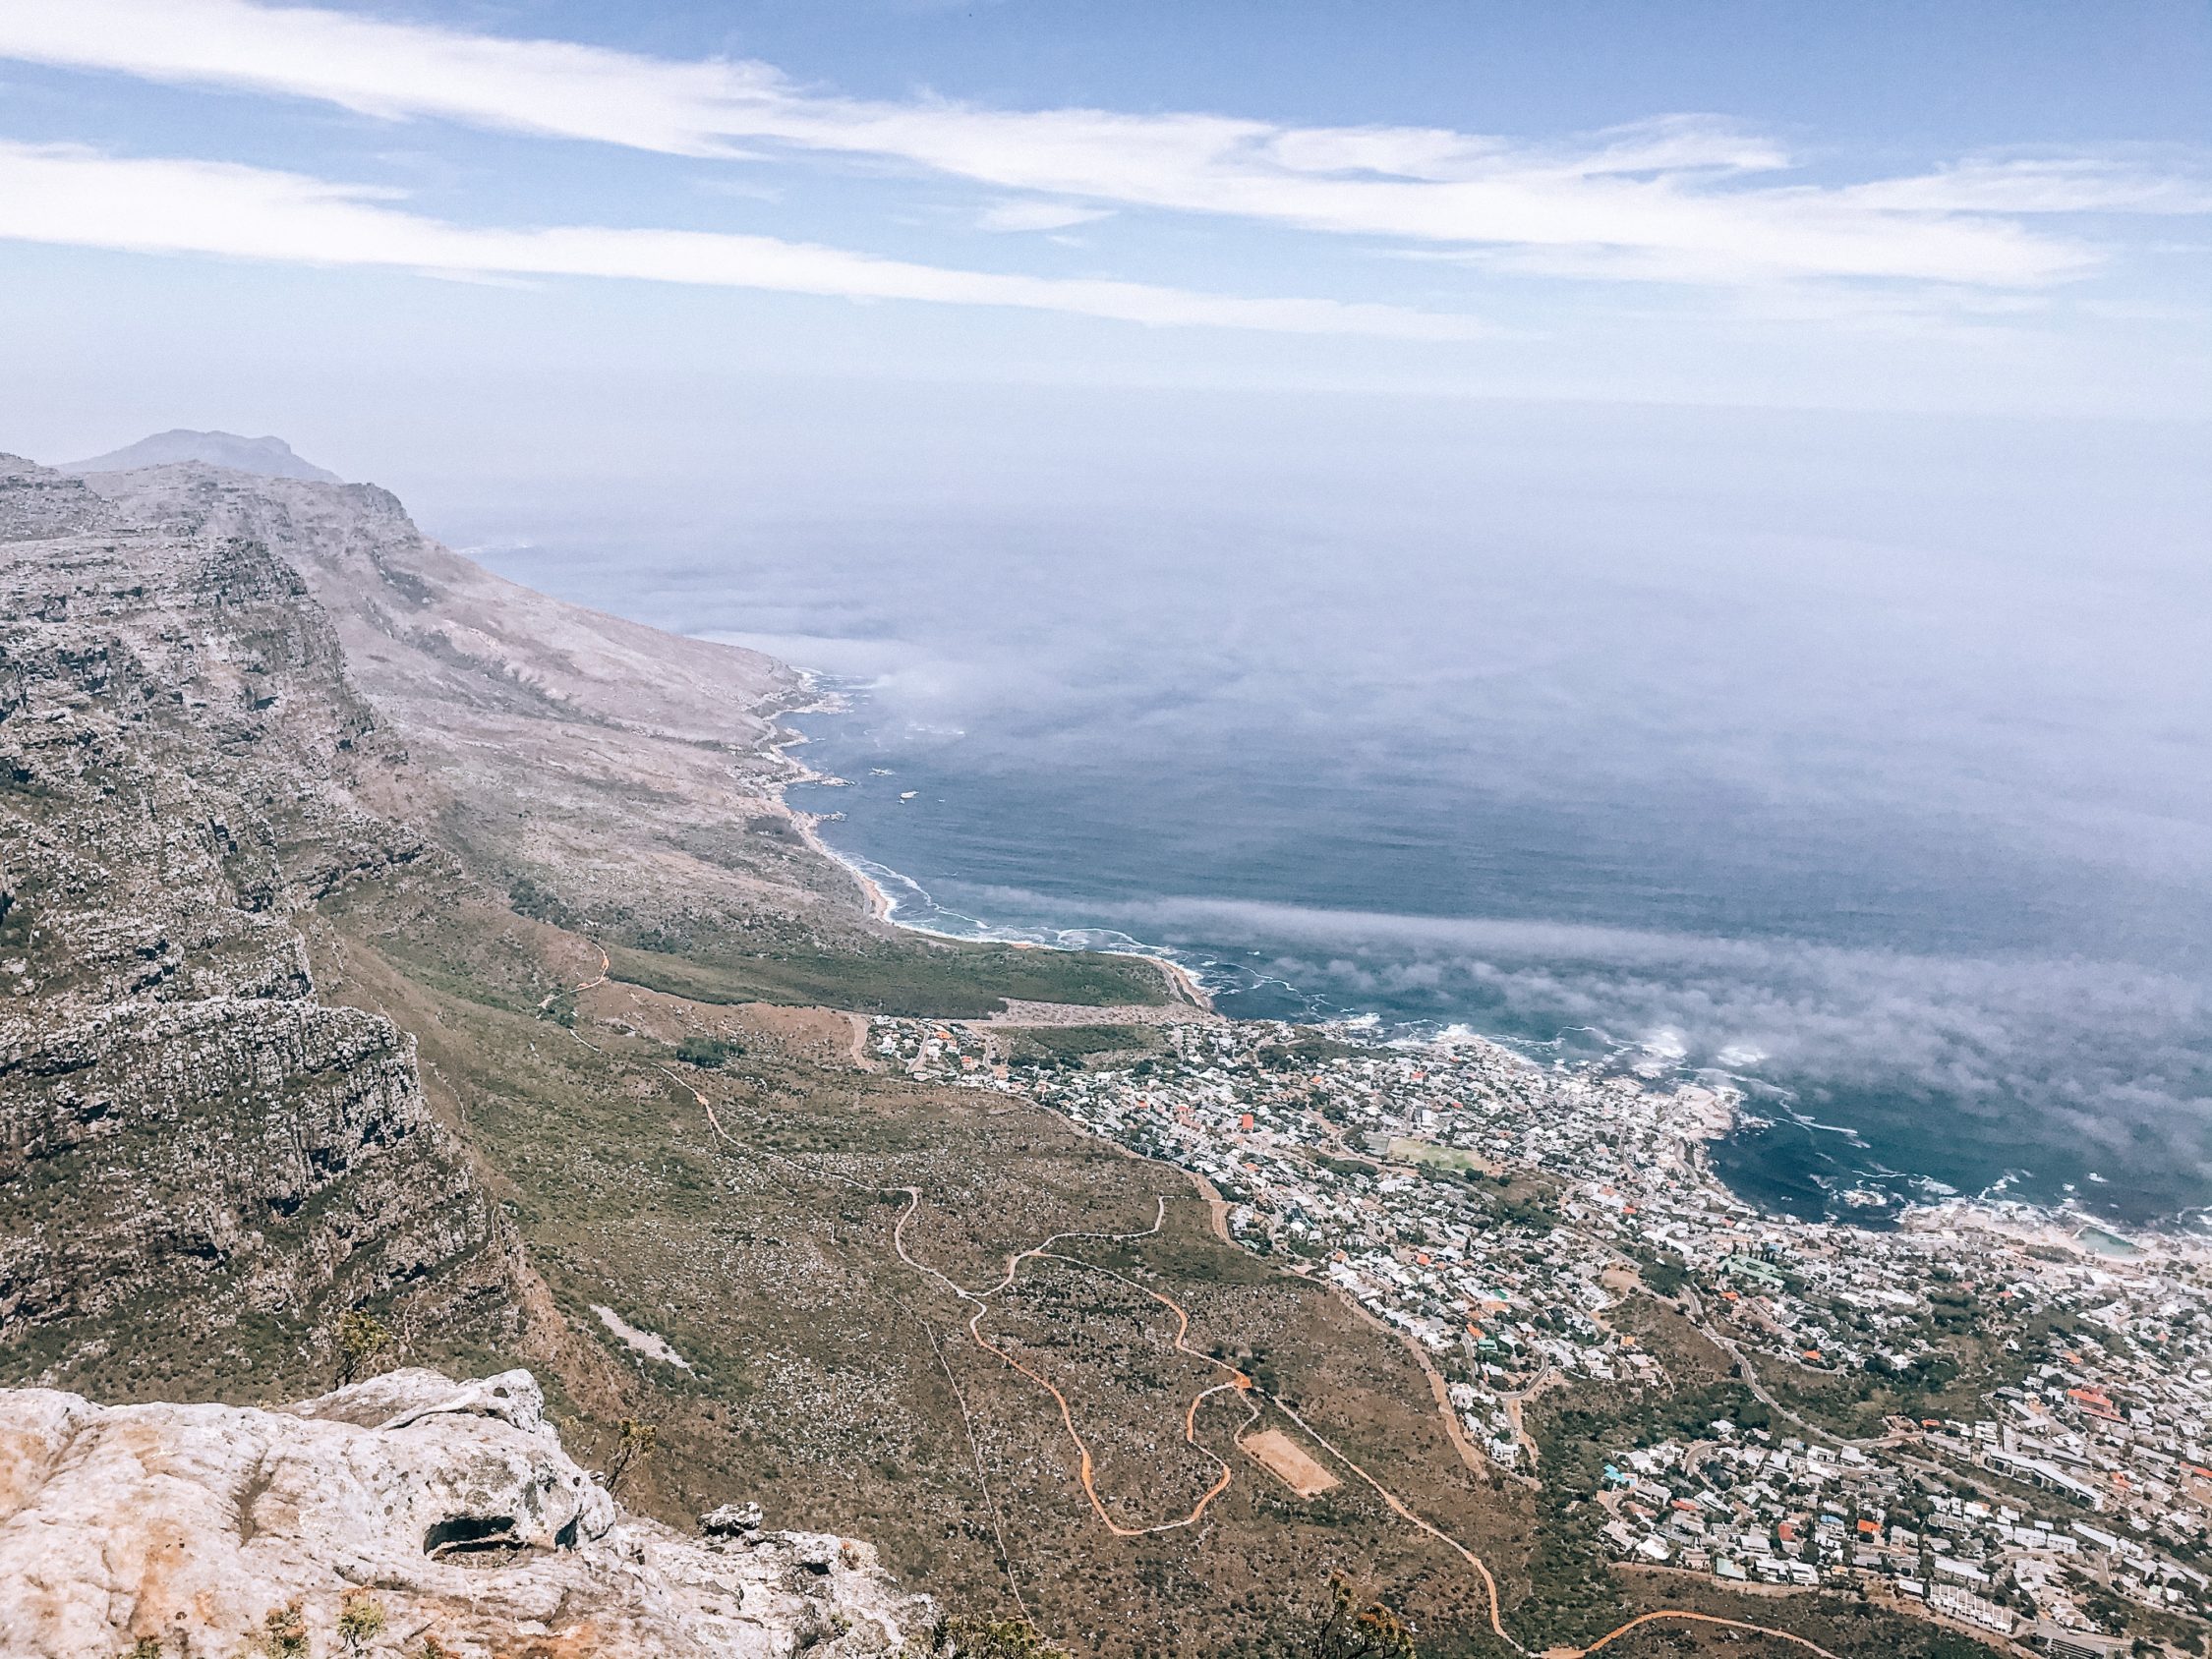 Cape Town and surrounding ocean seen from above